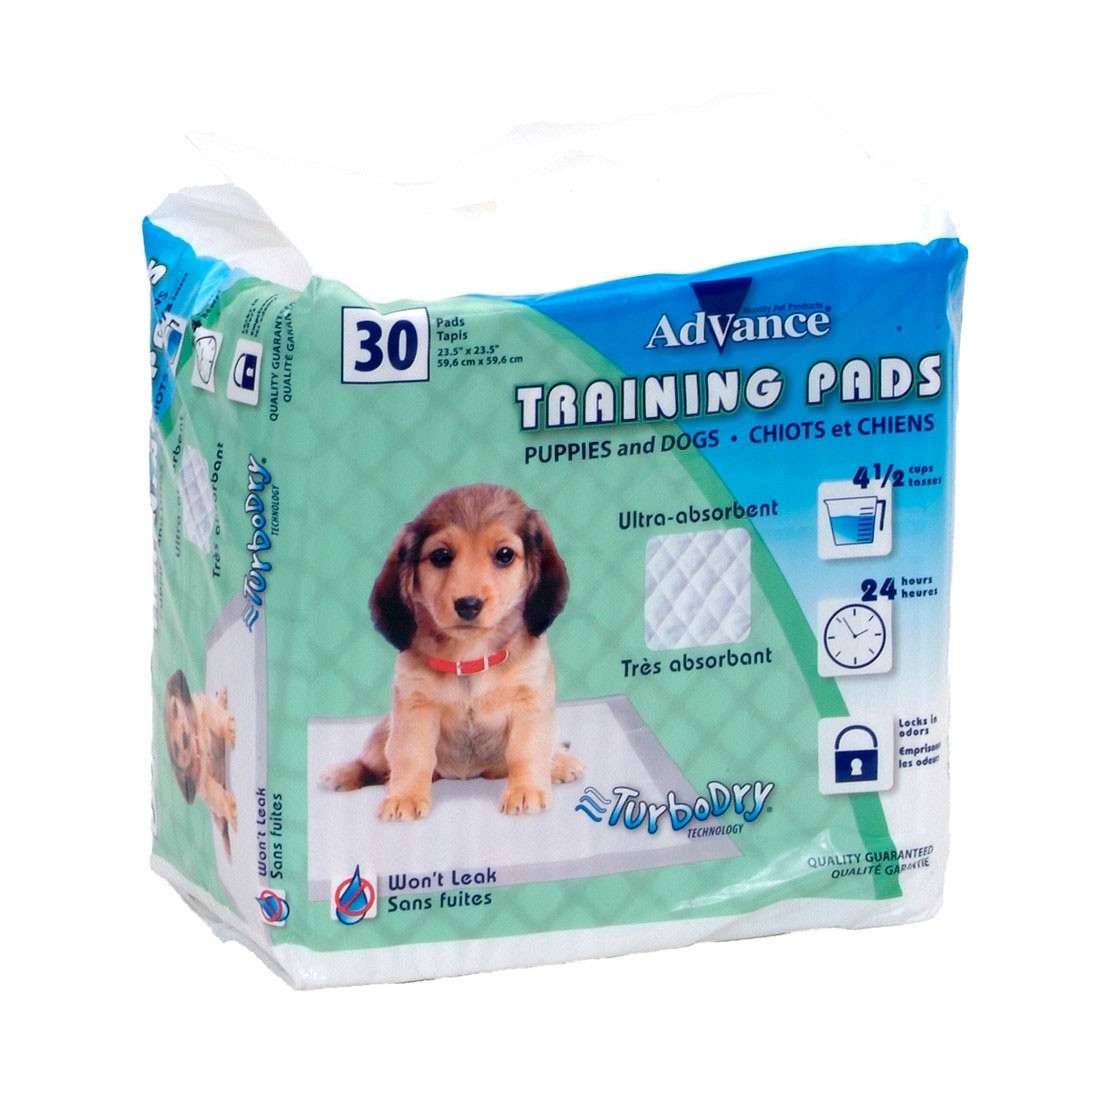 slide 1 of 1, Advance Dog Training Pads with Turbo Dry Technology, No Color, 30 Pack - 23.5" x 23.5", 30 ct